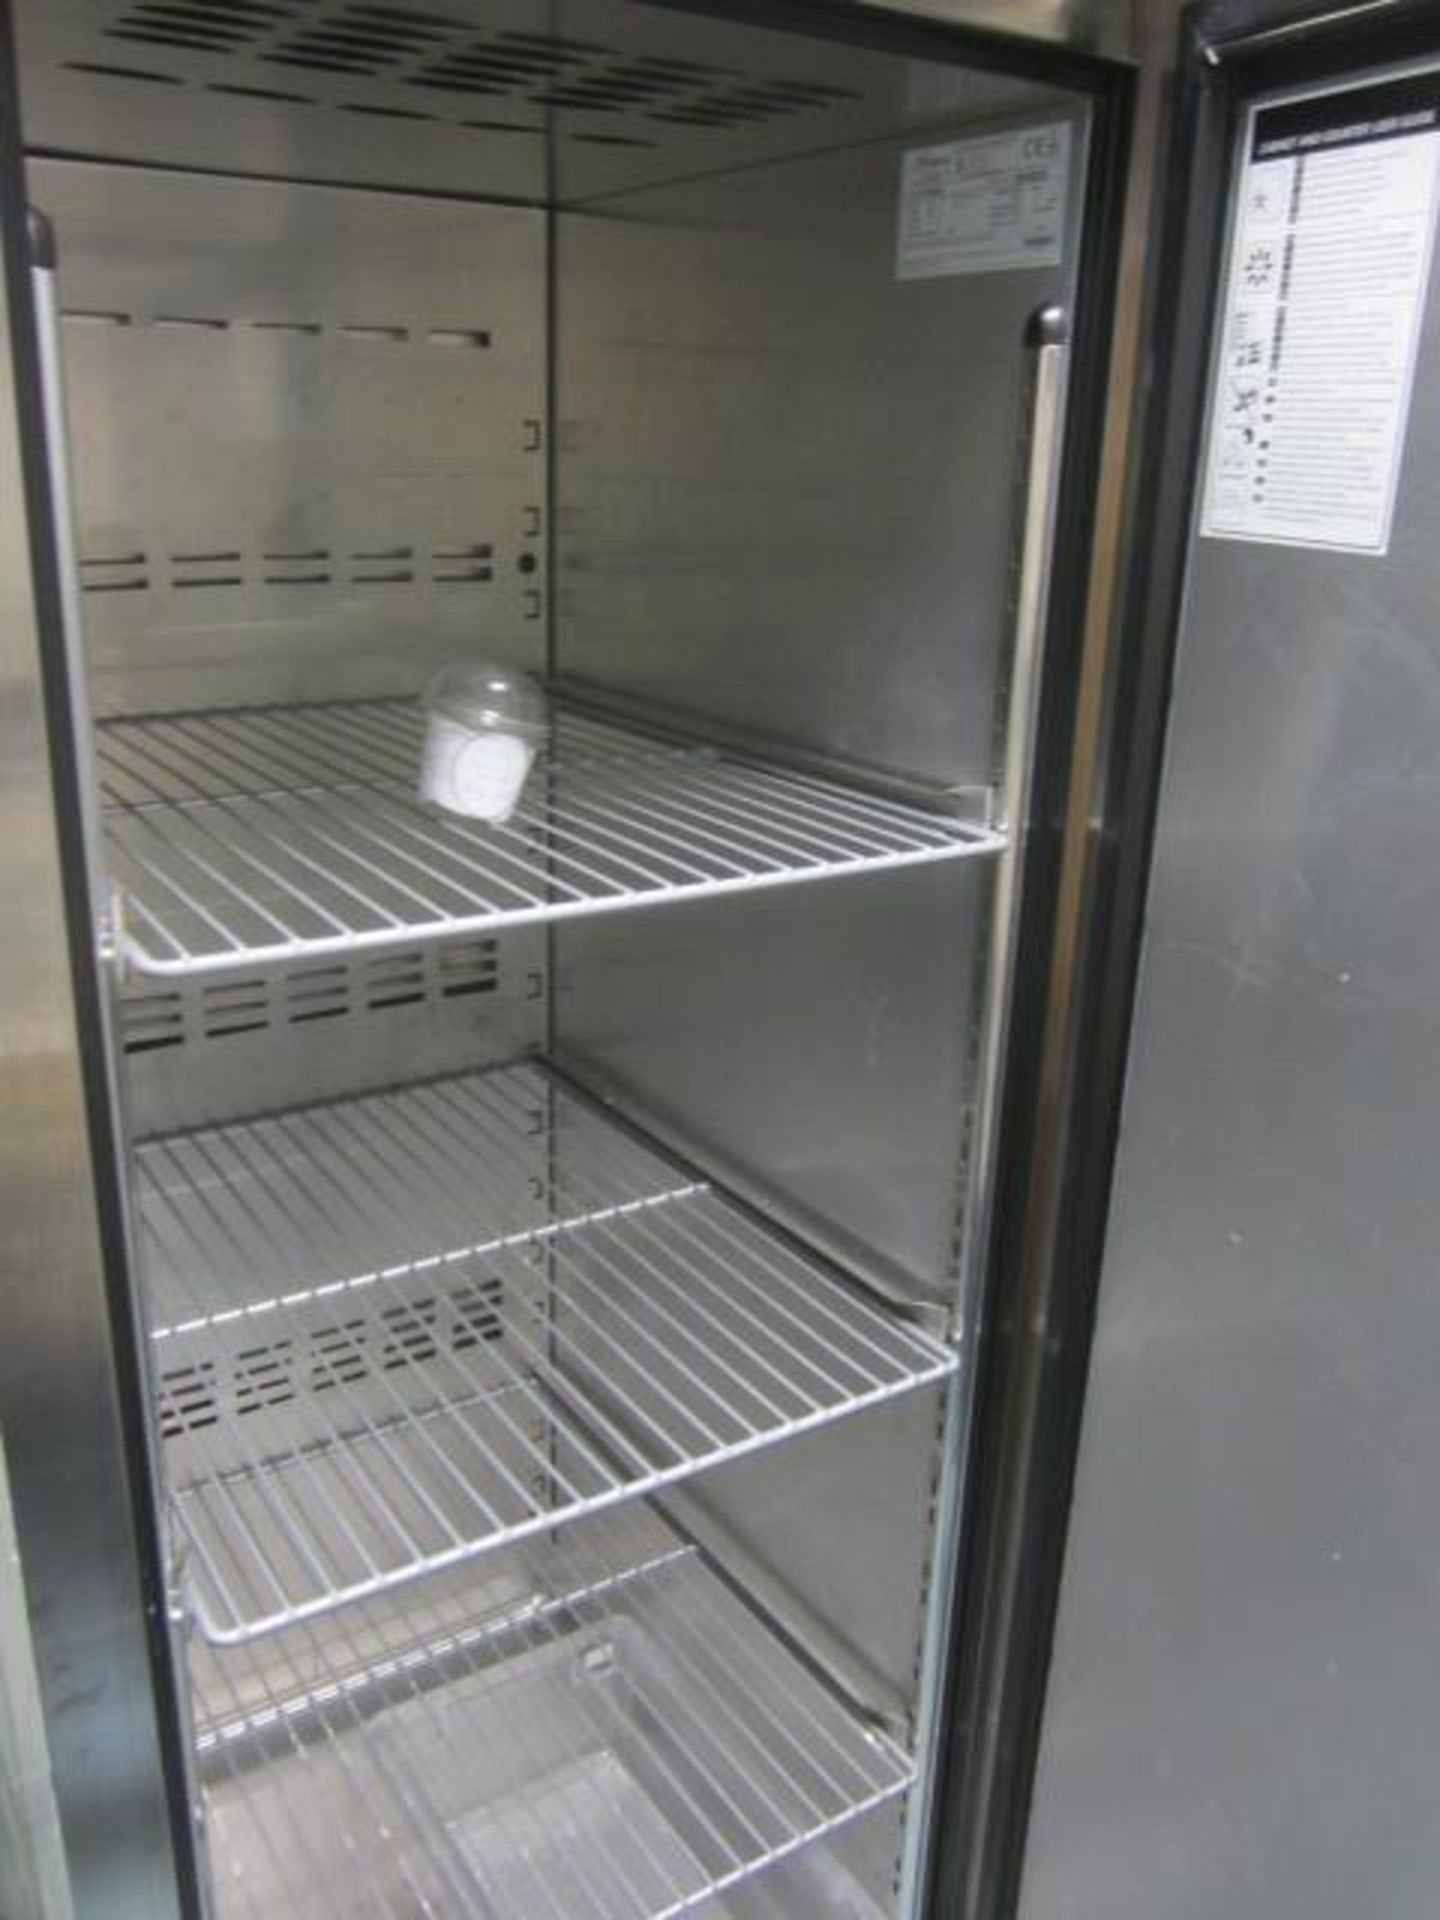 Foster Eco Pro G2 stainless steel single door commercial fridge, model EP700W, serial no. - Image 3 of 3